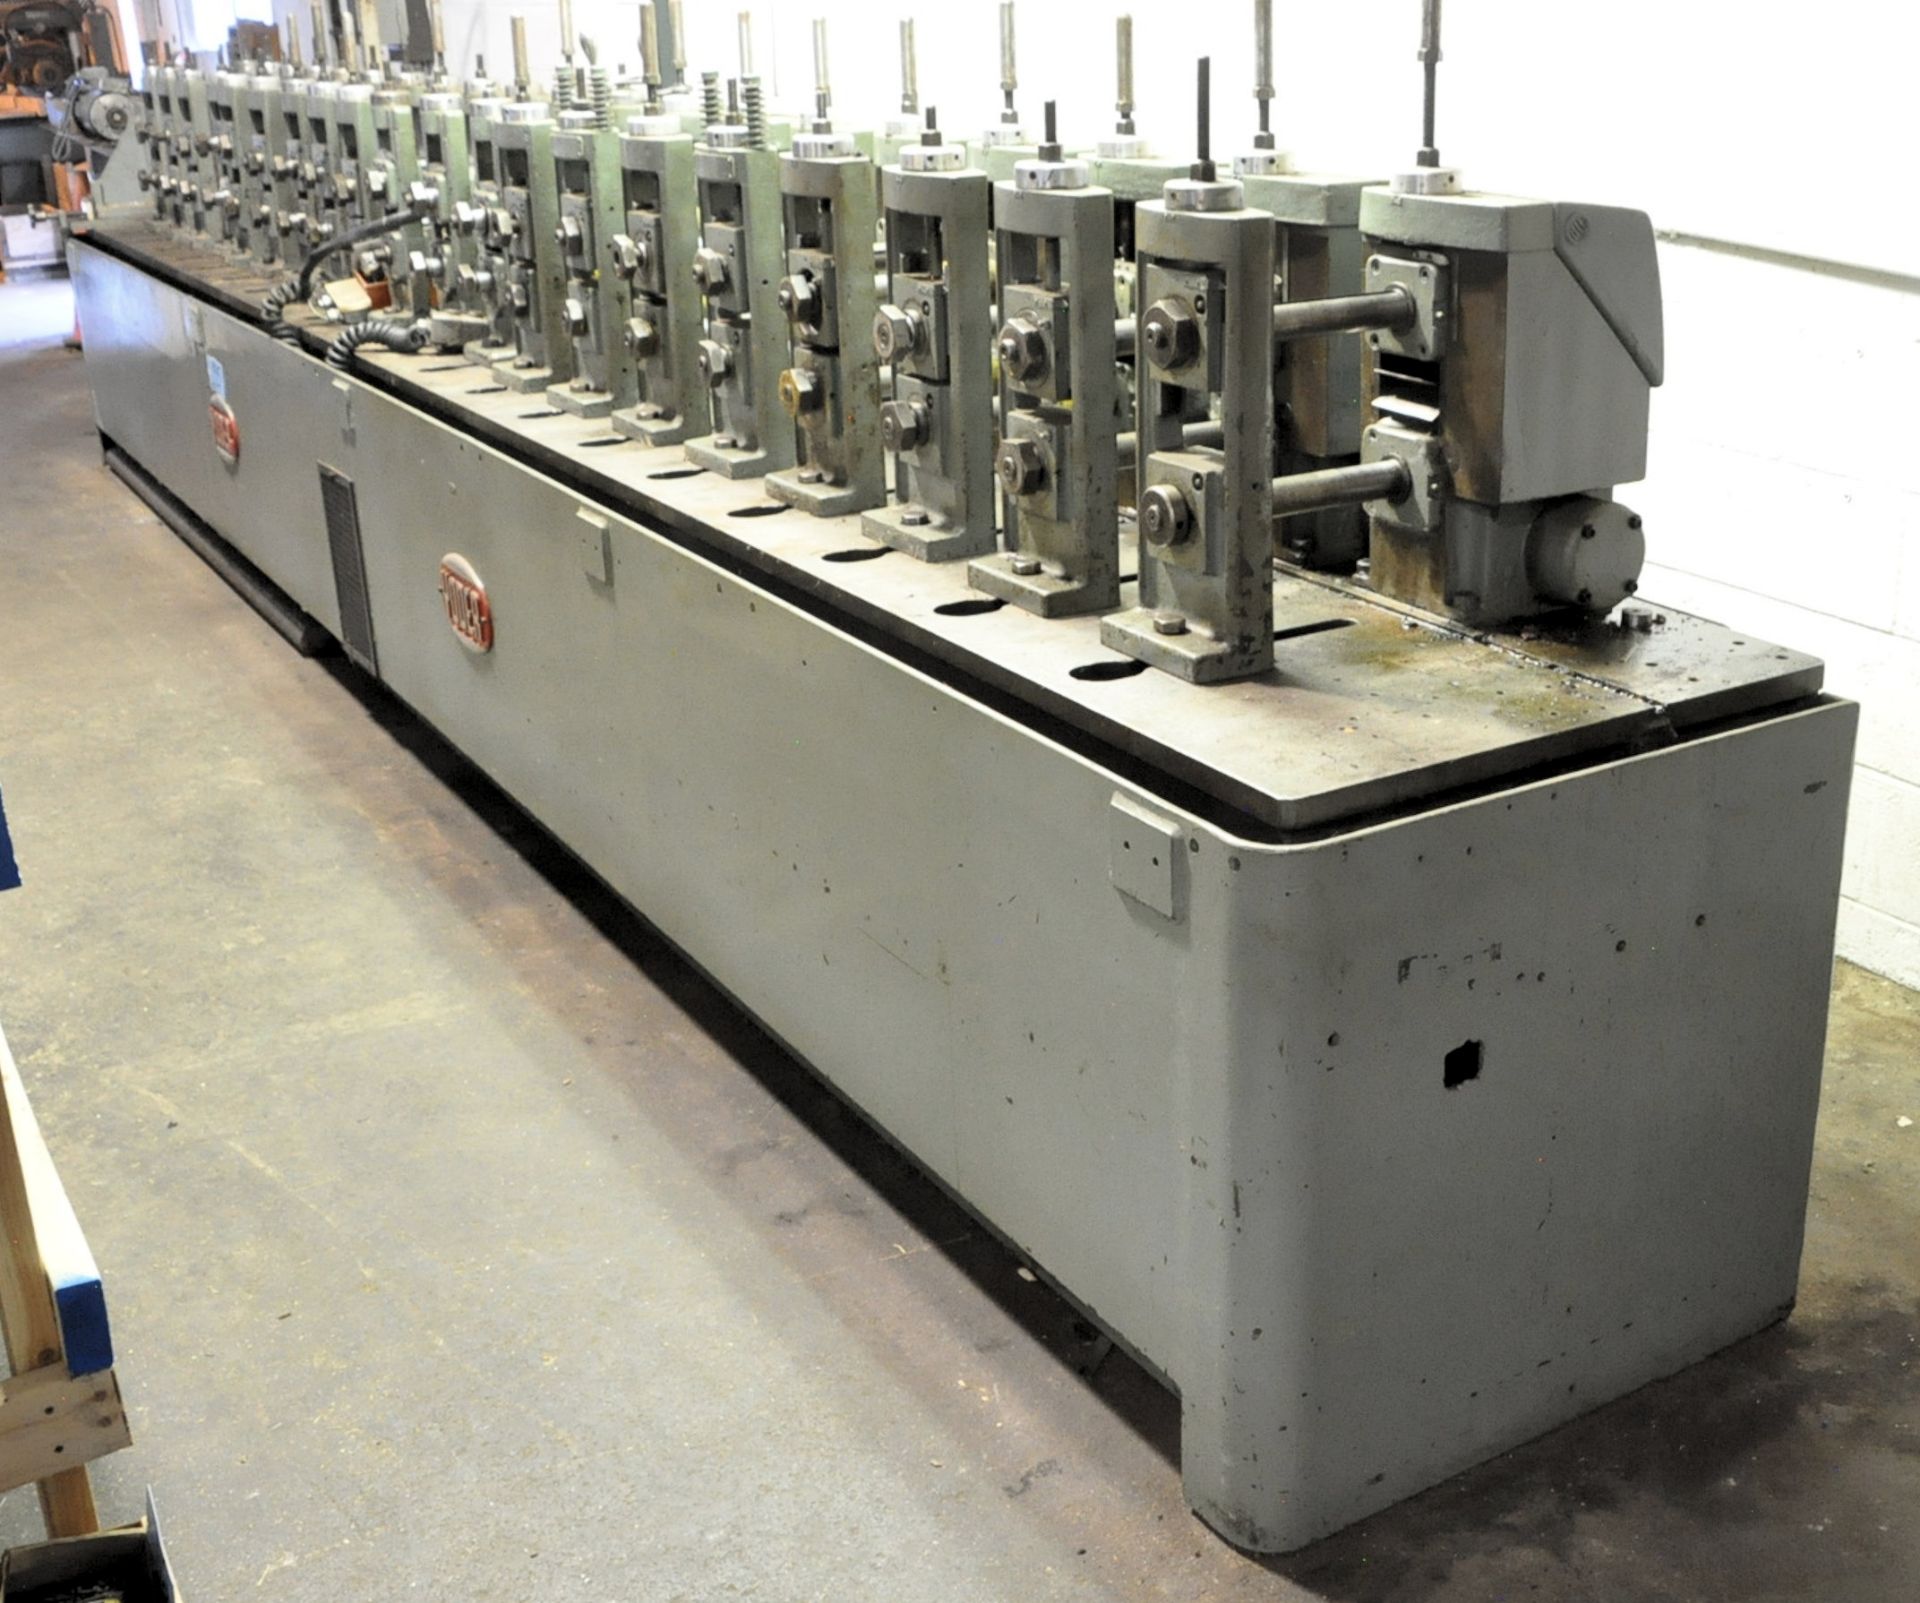 Yoder 20-Stand Roll Former